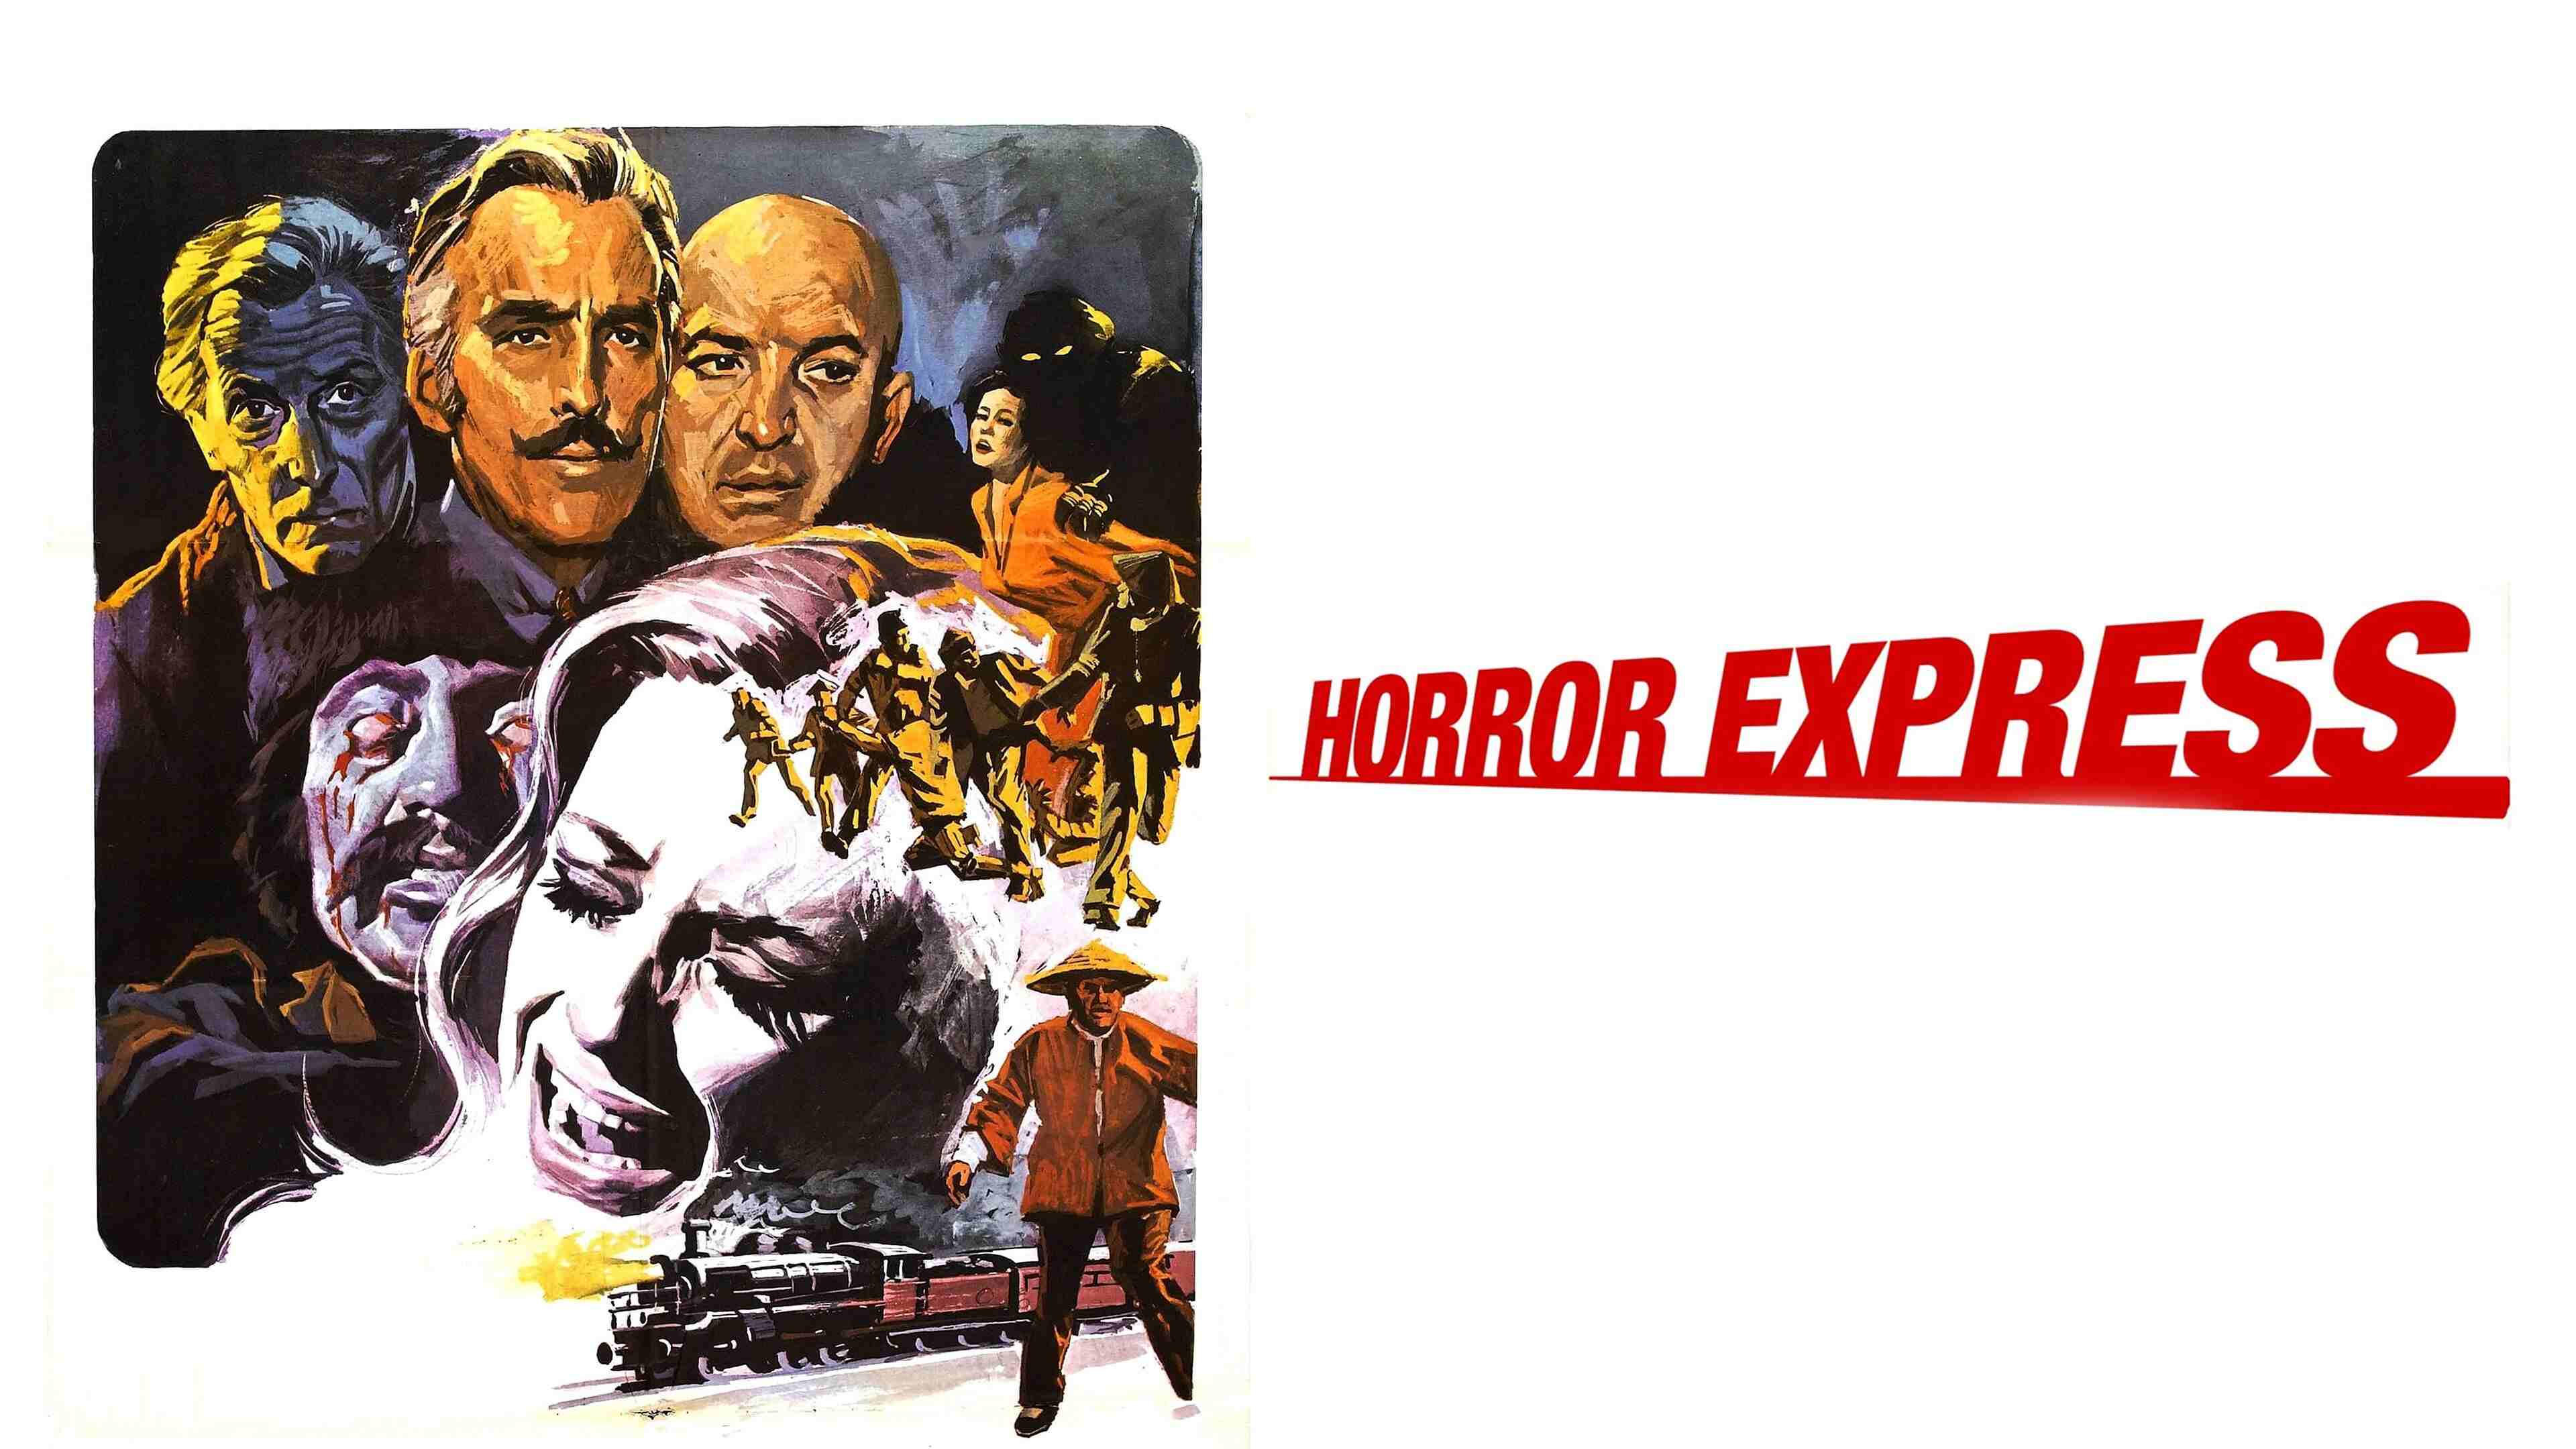 33-facts-about-the-movie-horror-express